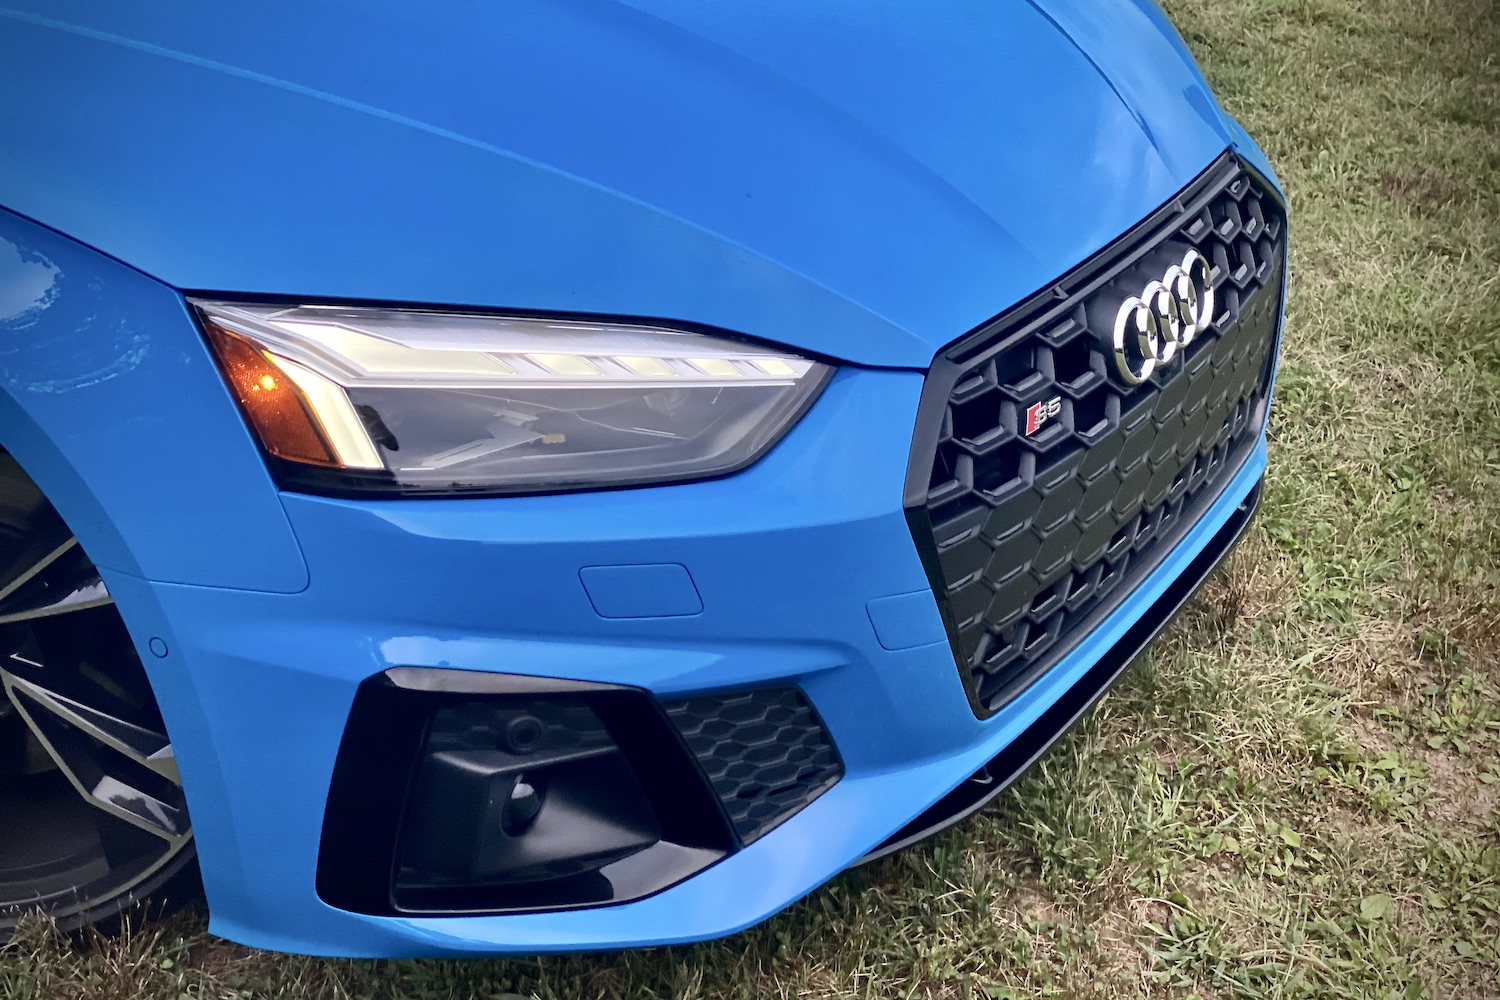 Close up of front end of 2023 Audi S5 Sportback in a grassy field.